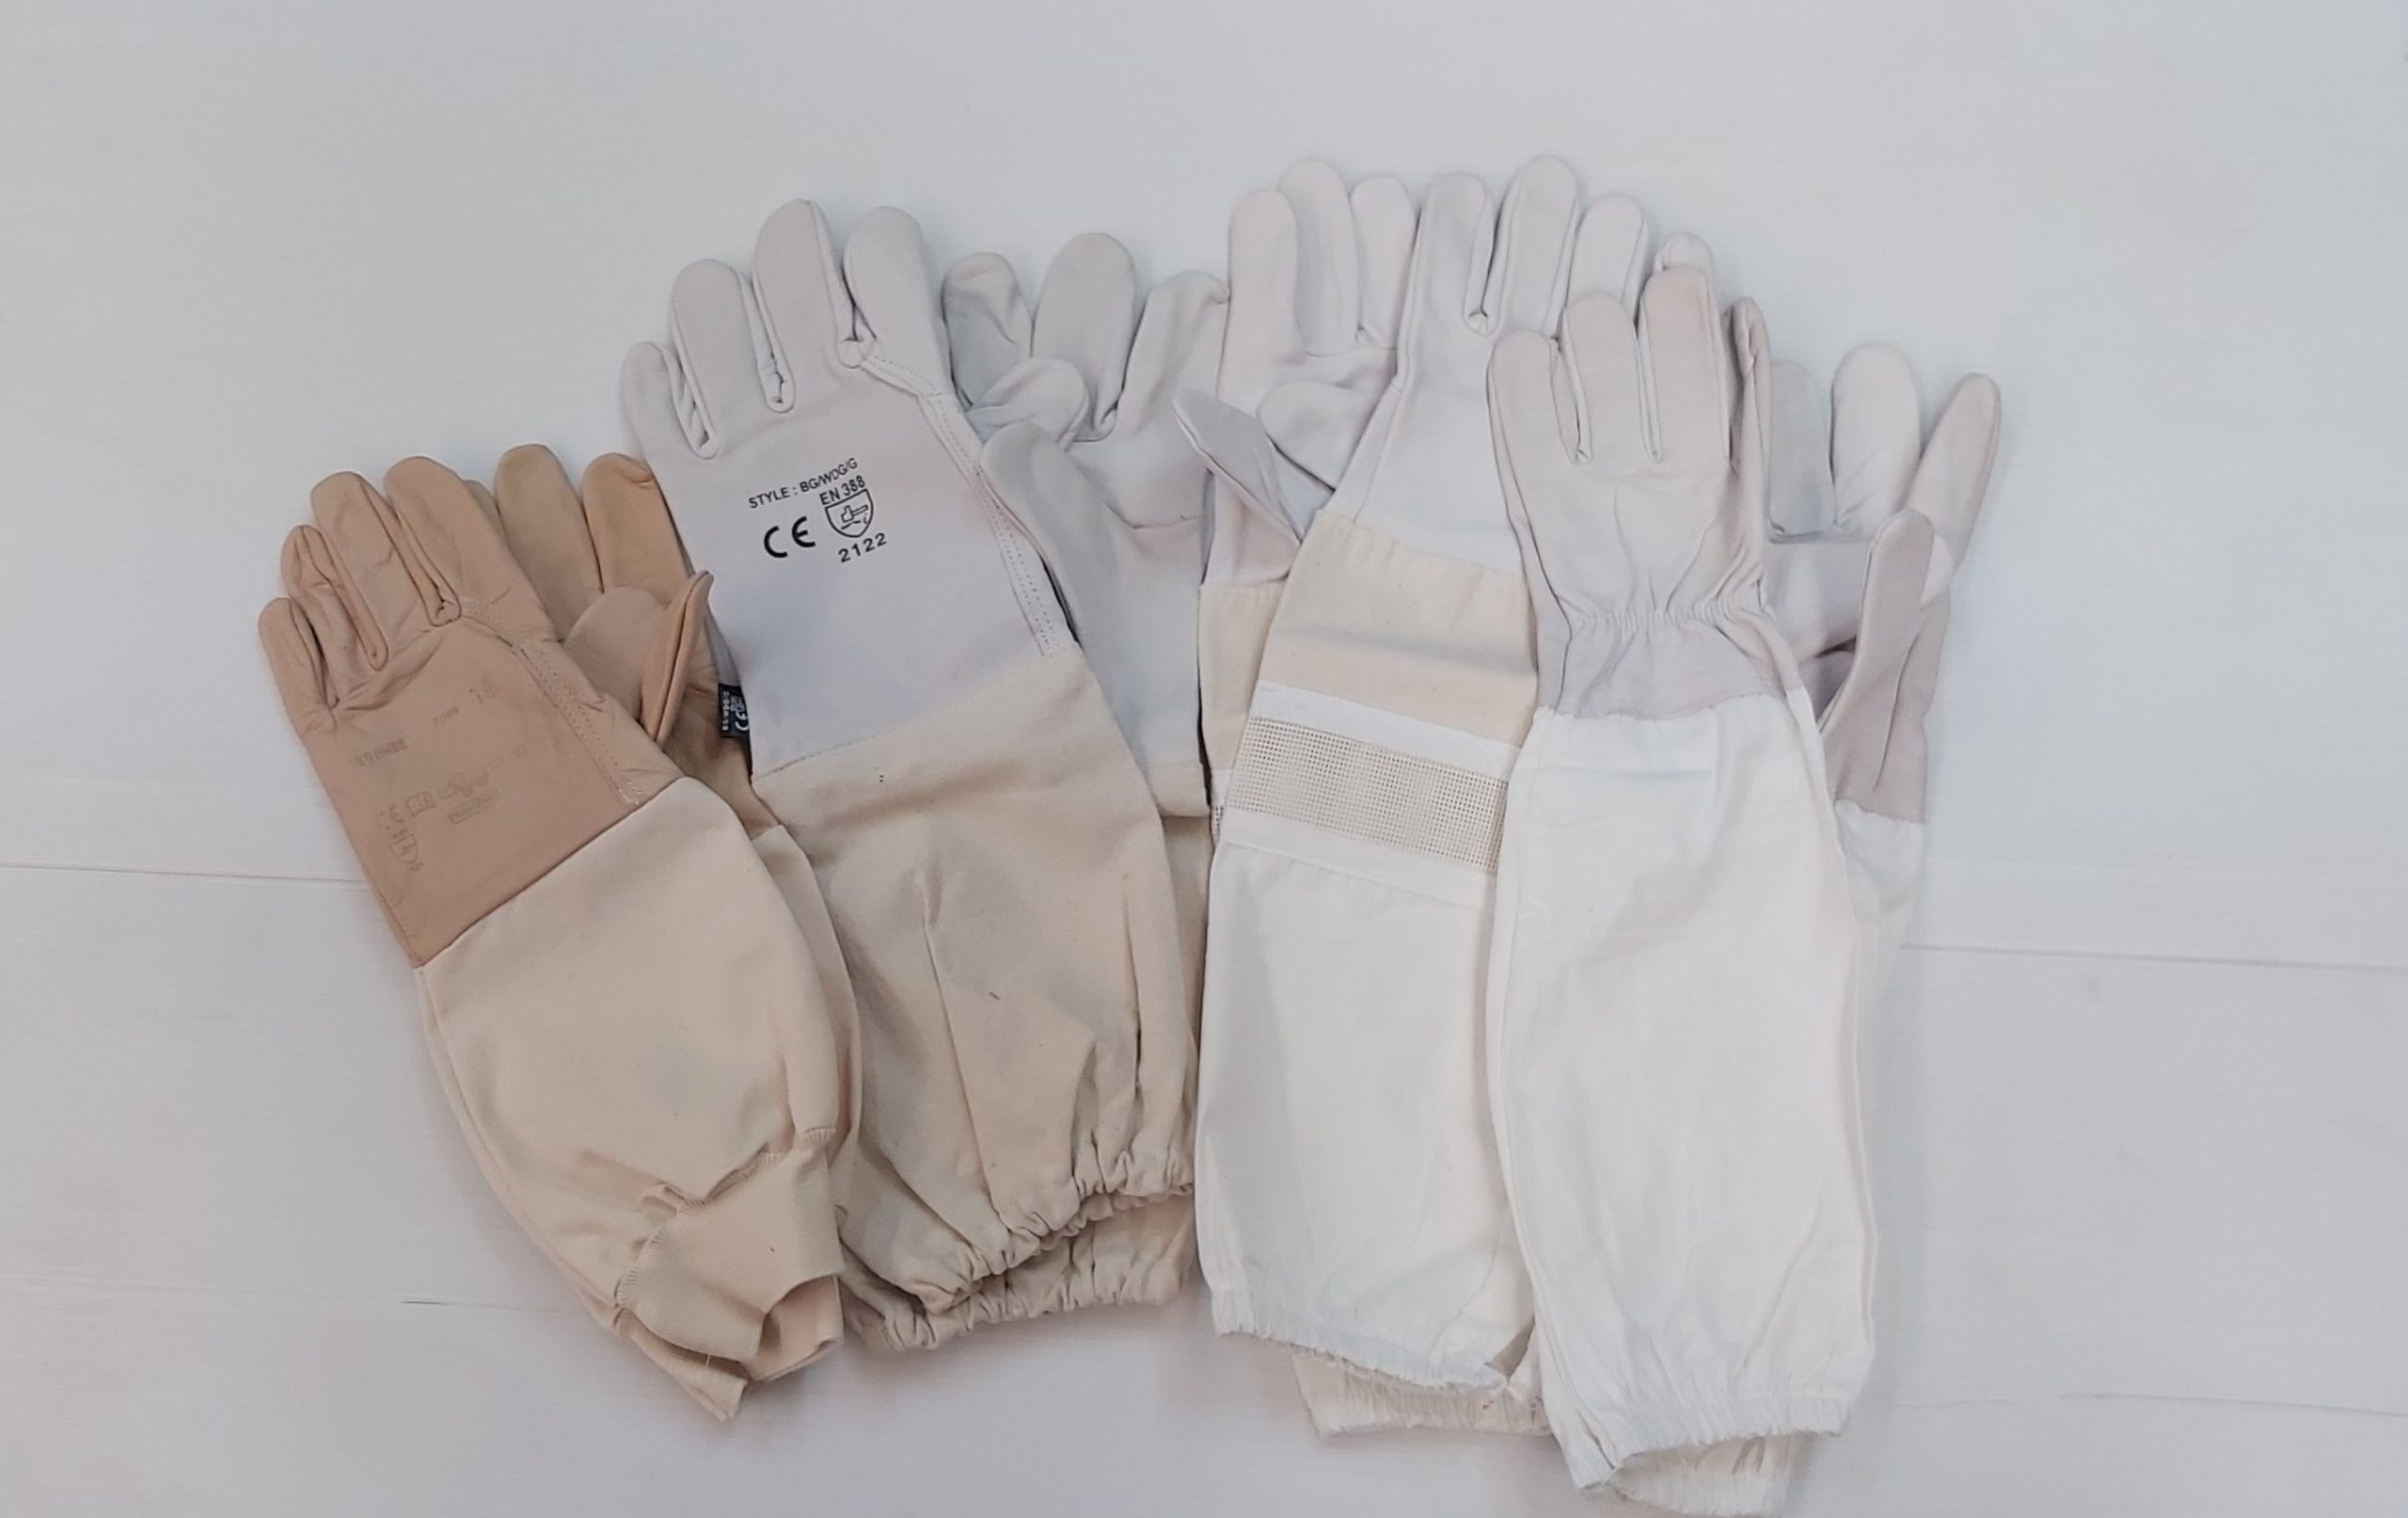 https://www.hiveworld.co.nz/wp-content/uploads/2021/08/Gloves-scaled-2.jpg